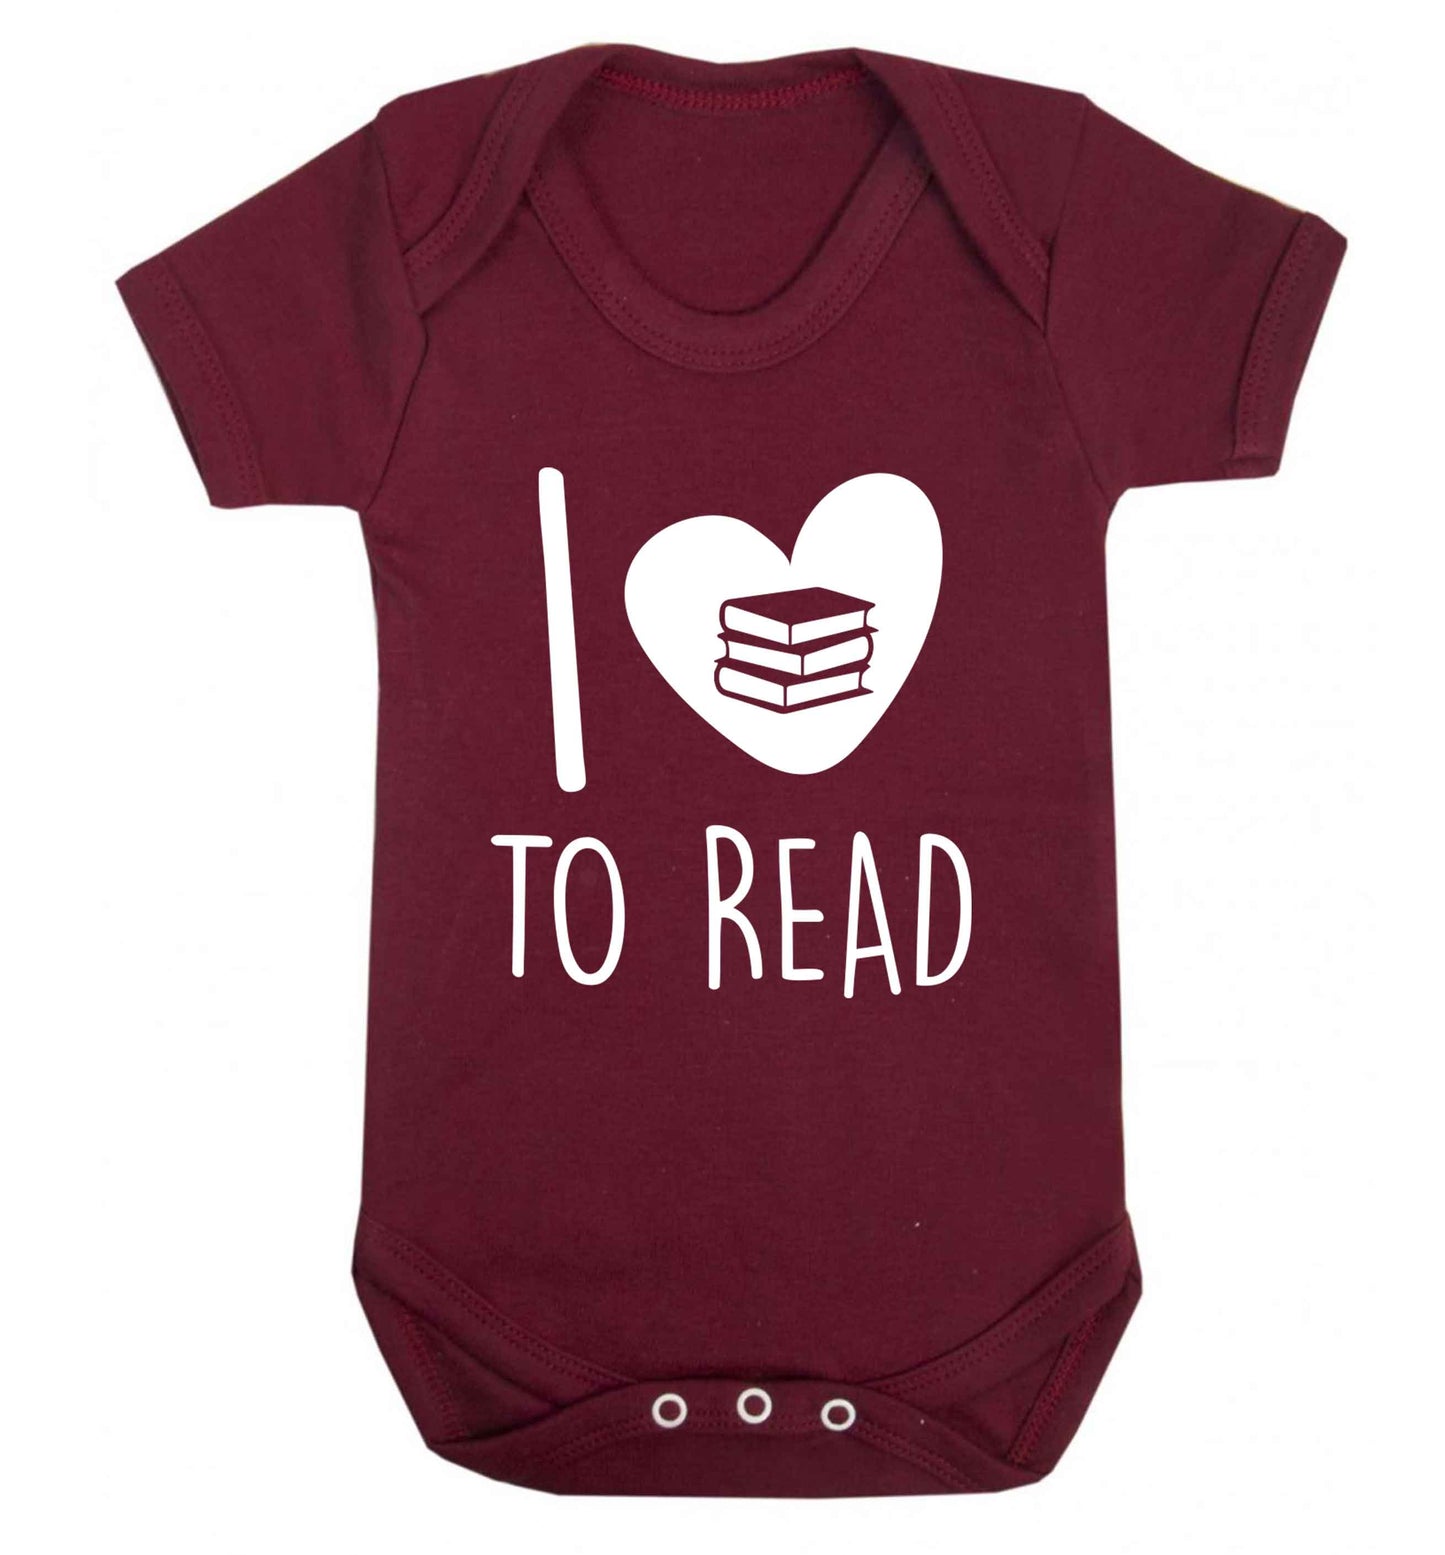 I love to read Baby Vest maroon 18-24 months